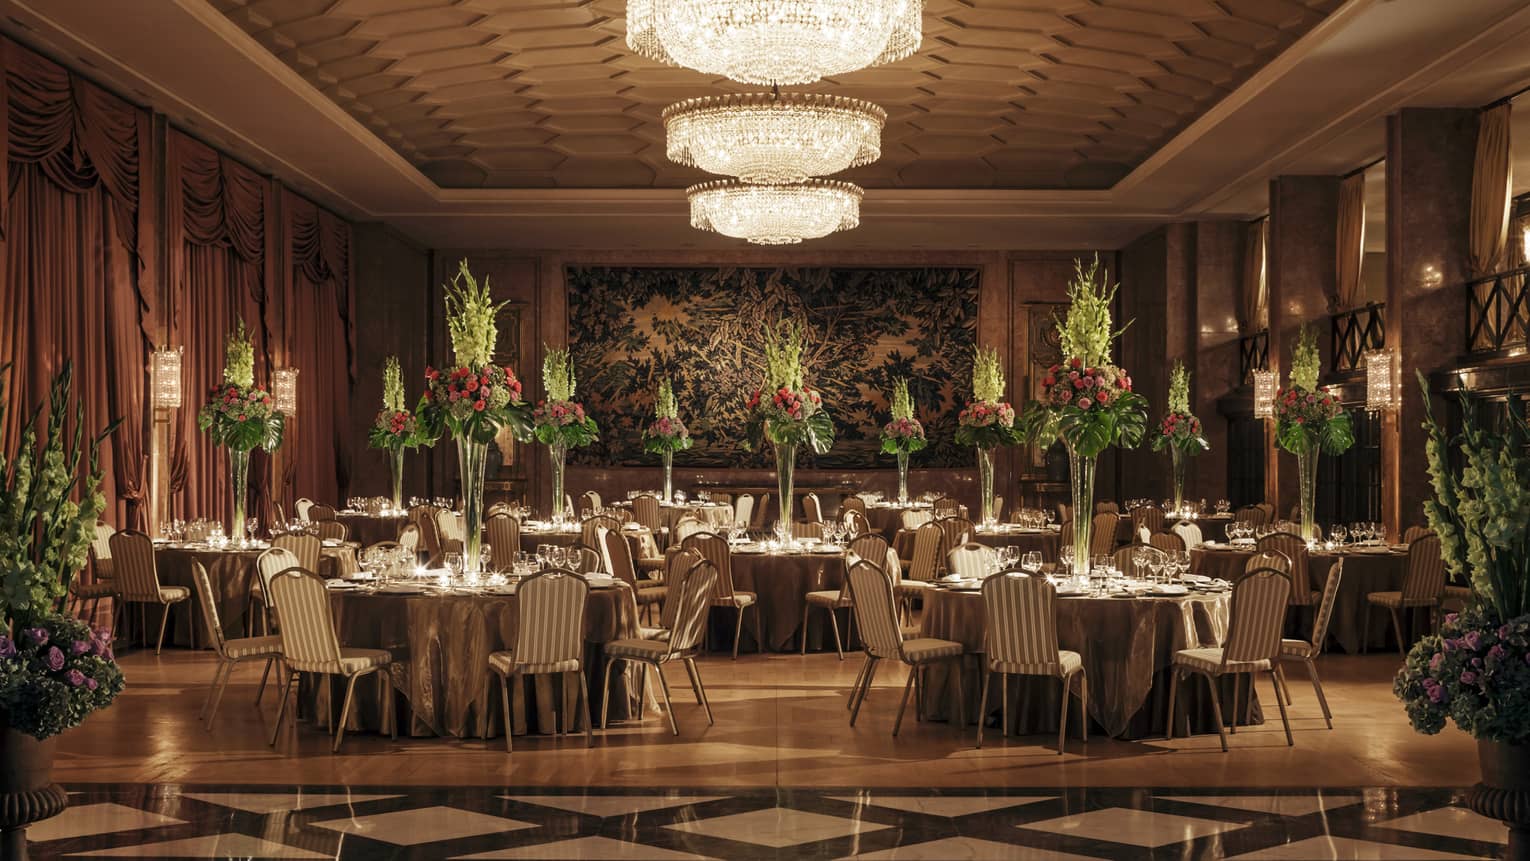 Art Deco-style dining room with tiles, banquet tables with tall flower arrangements, crystal chandelier 